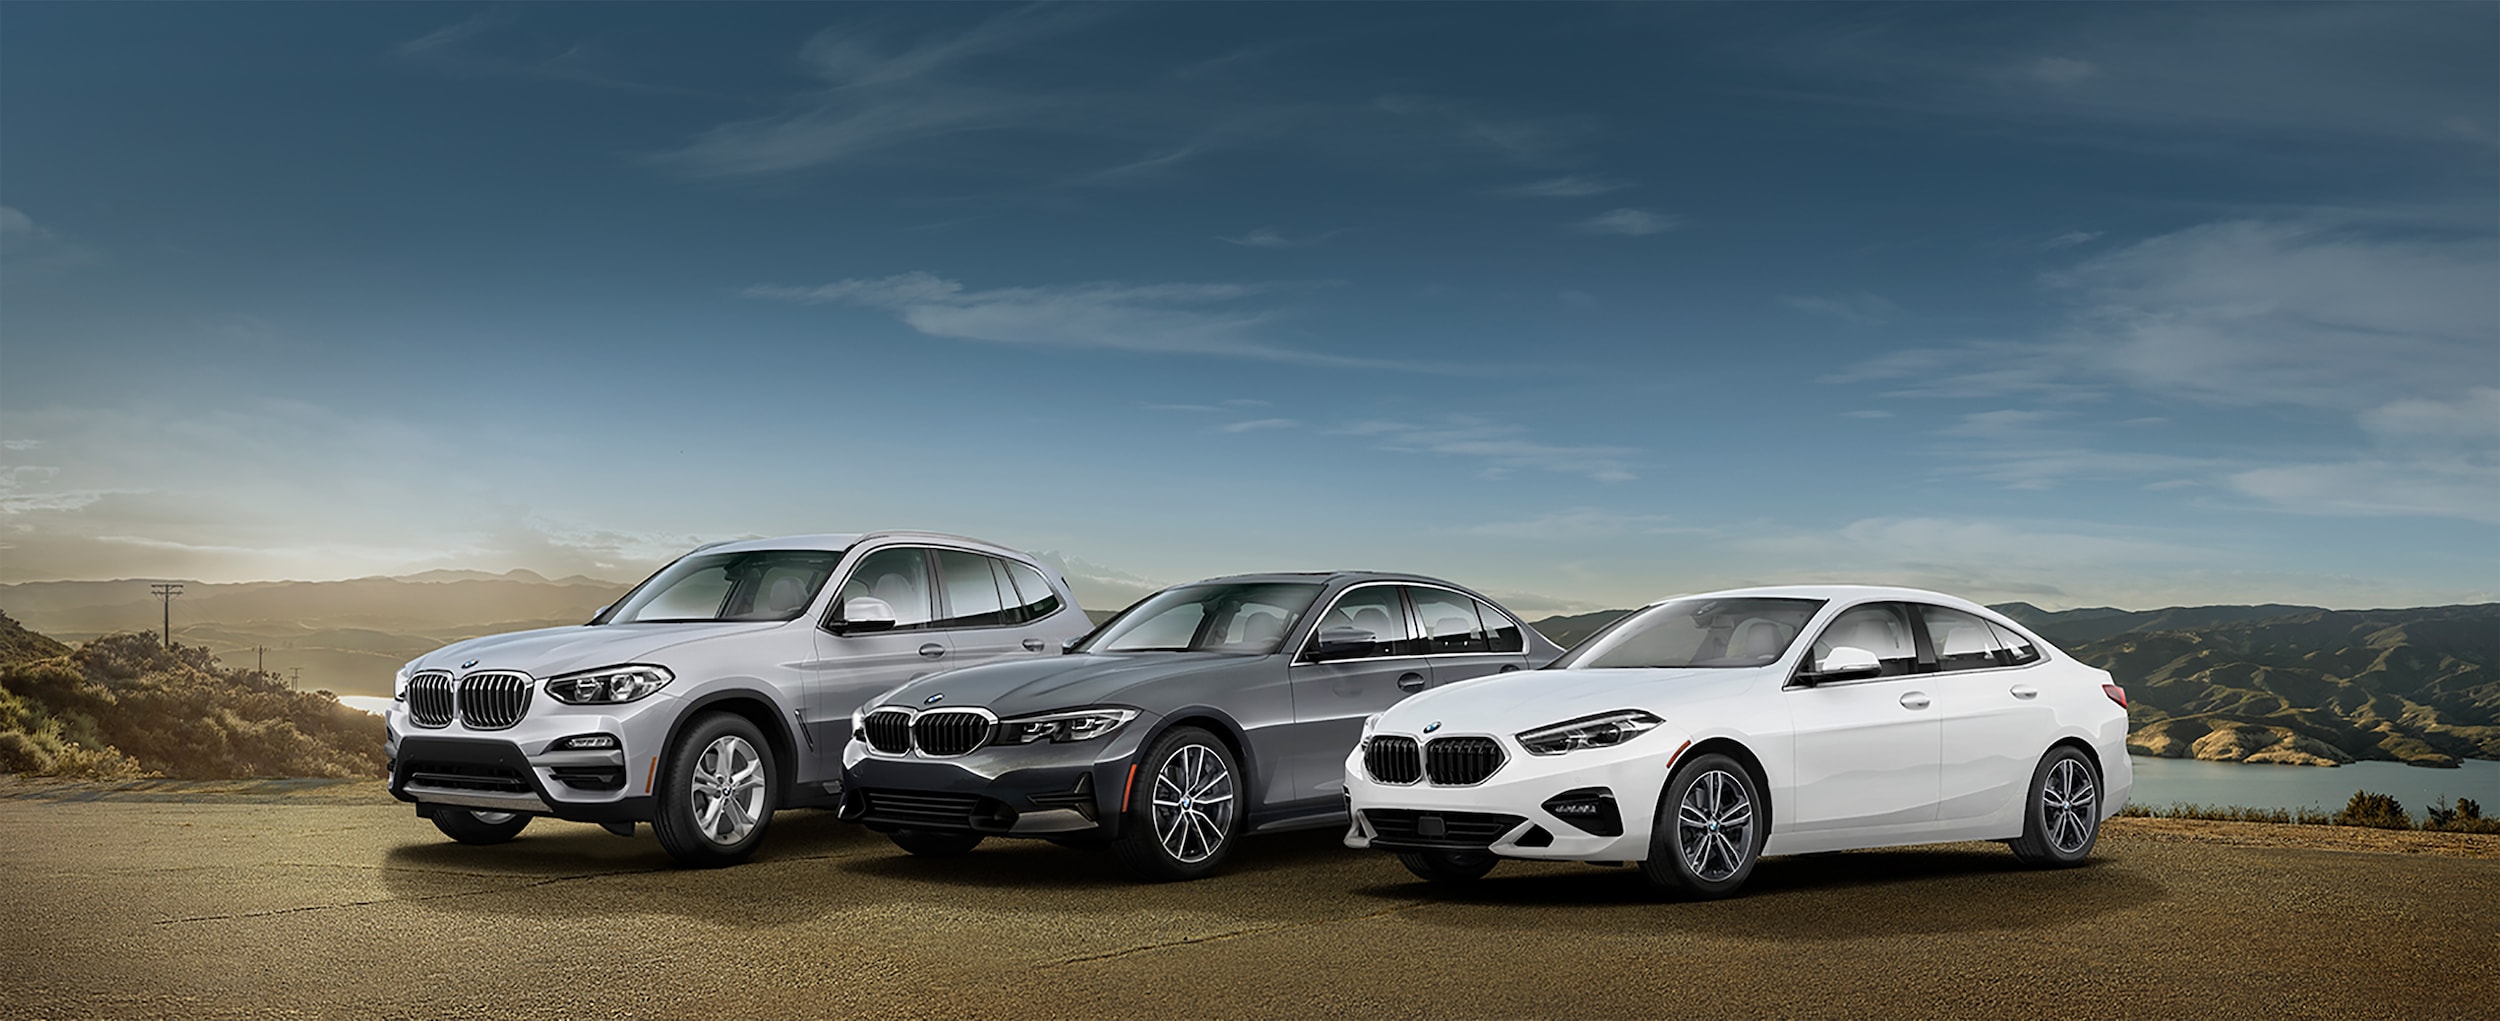 lease-or-buy-a-service-loaner-car-or-suv-from-paul-miller-bmw-paul